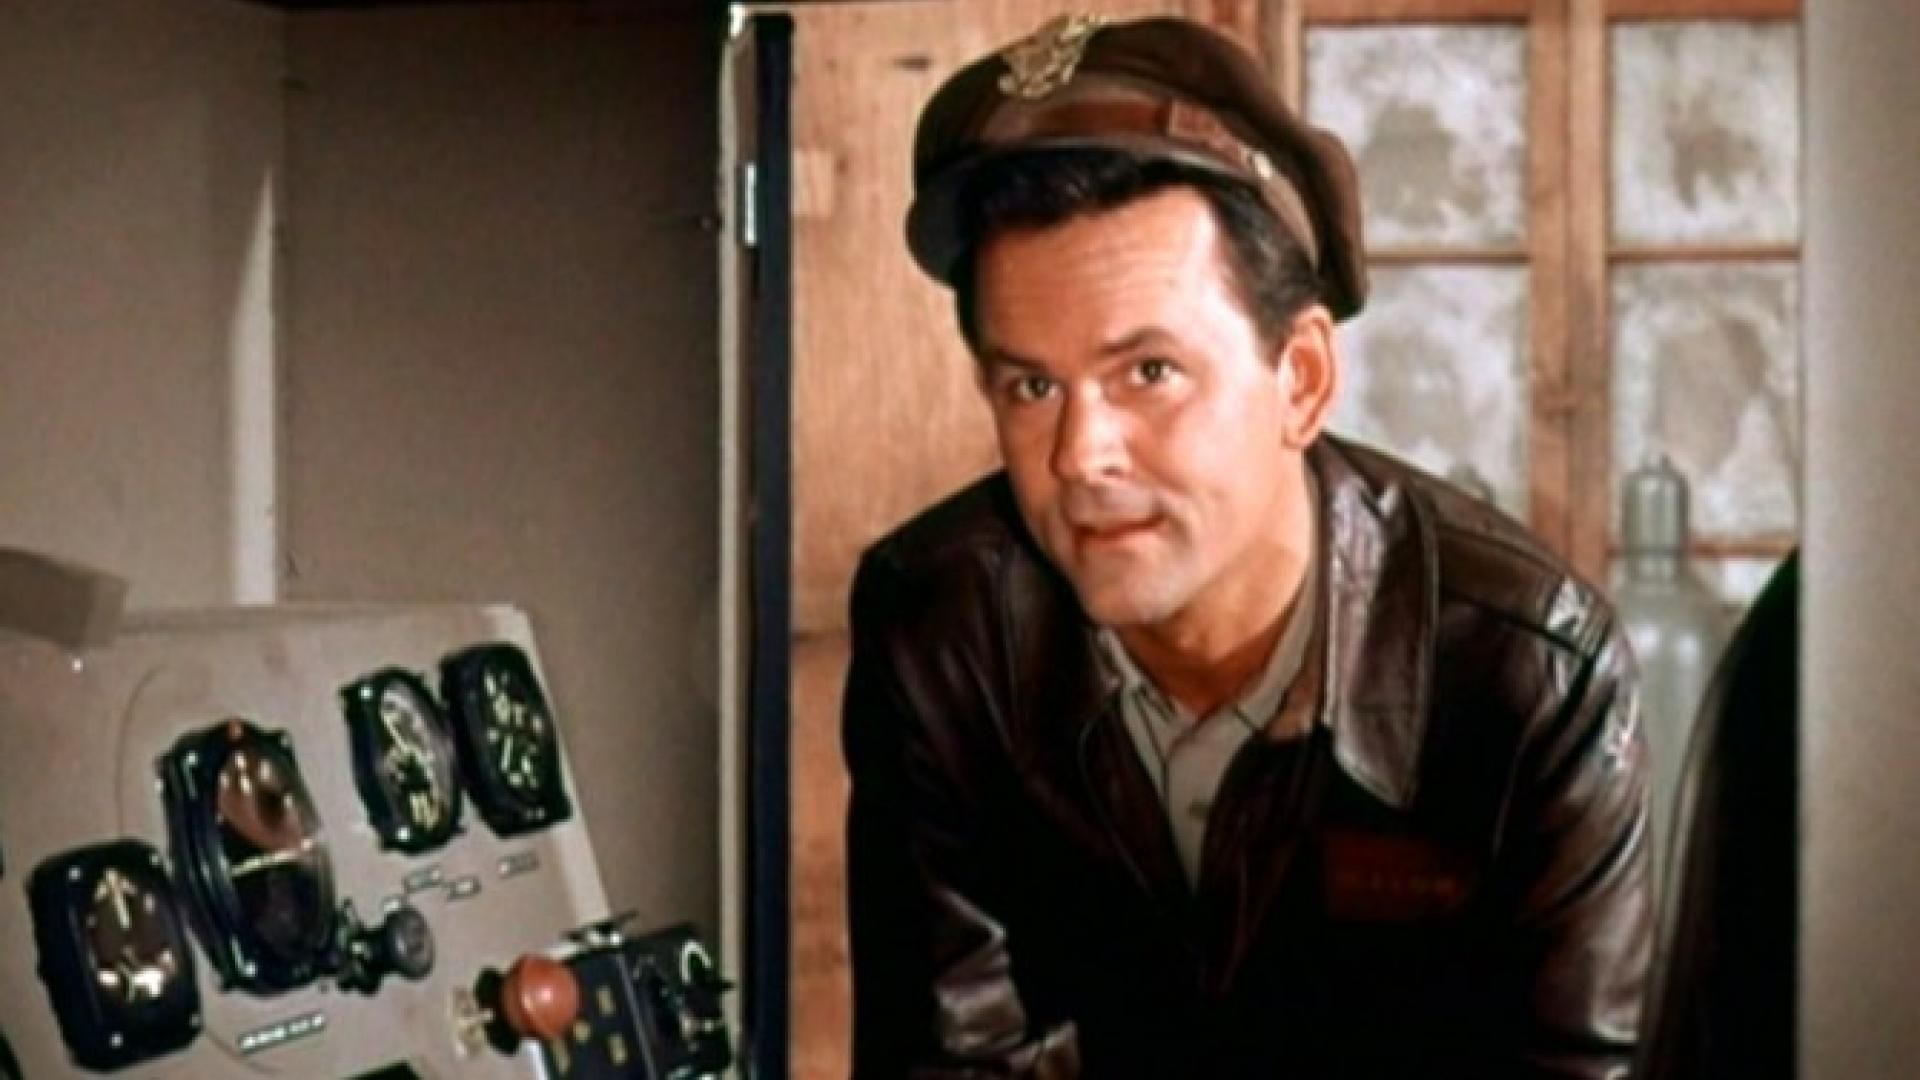 Son of Bob Crane from 'Hogan's Heroes' Identifies New Suspect in His Father's Death